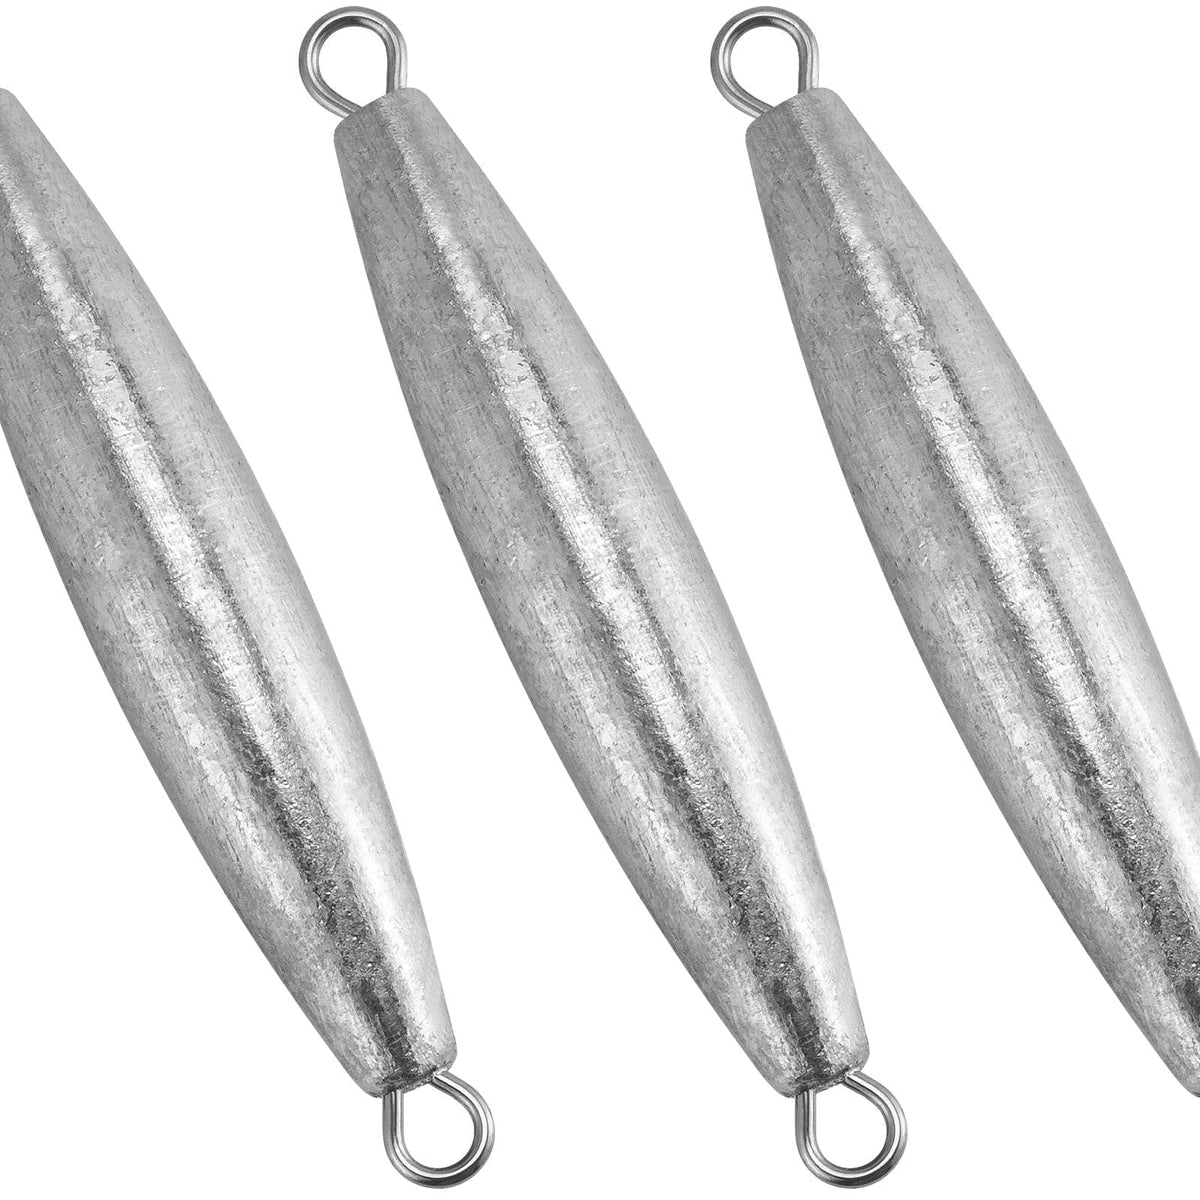 Spider Sinker Lead Weights for Surf Fishing 1oz to 8oz Online Sale – Dr.Fish  Tackles